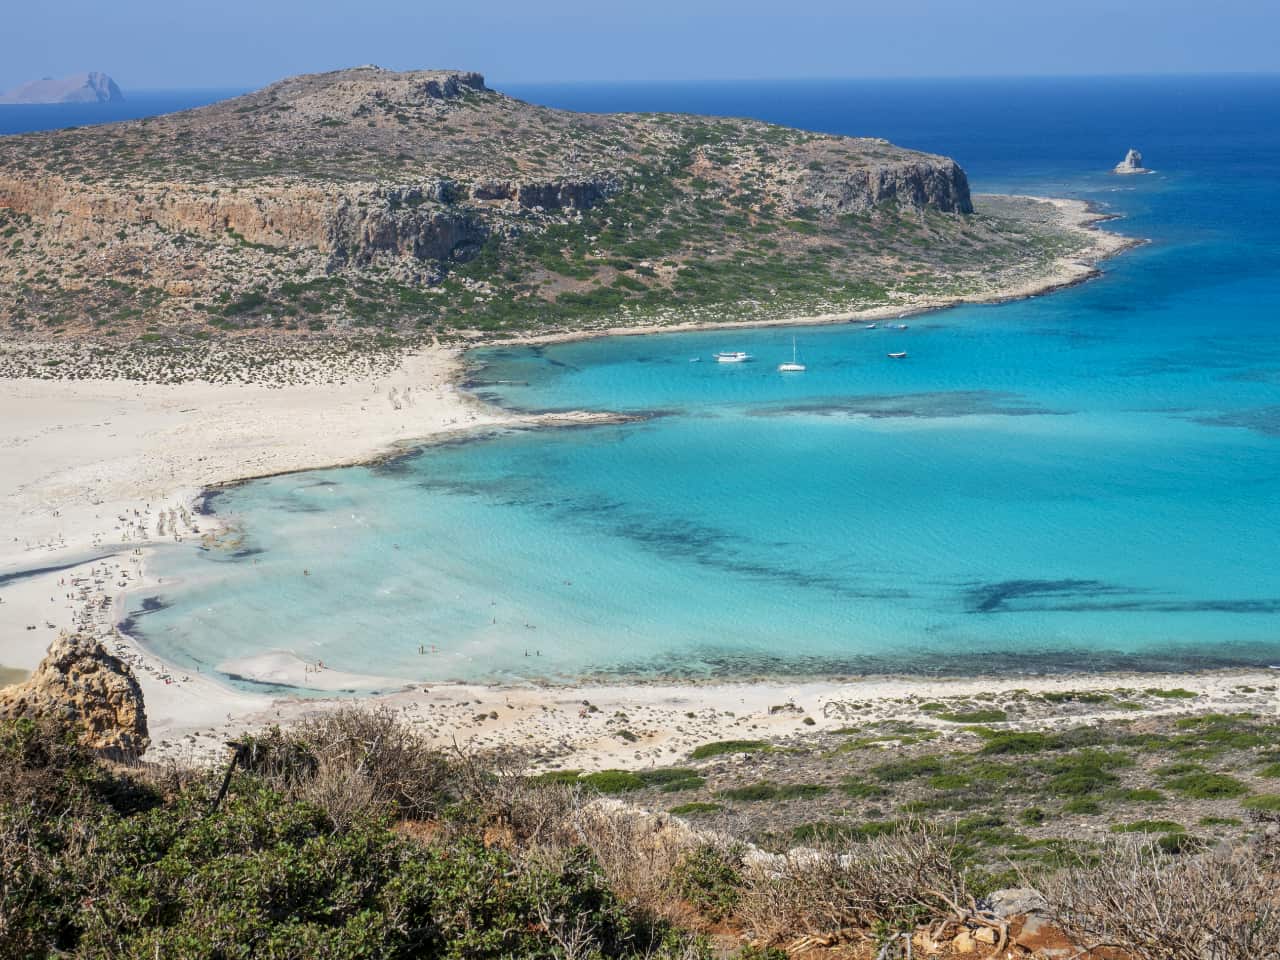 Private Premium Safari Road Trip to Balos Lagoo, jeep safari to balos beach, balos beach chania crete, activities chania, what to do chania, how to visit balos, best way to visit balos lagoon, crete travel, small tours to balos lagoon crete